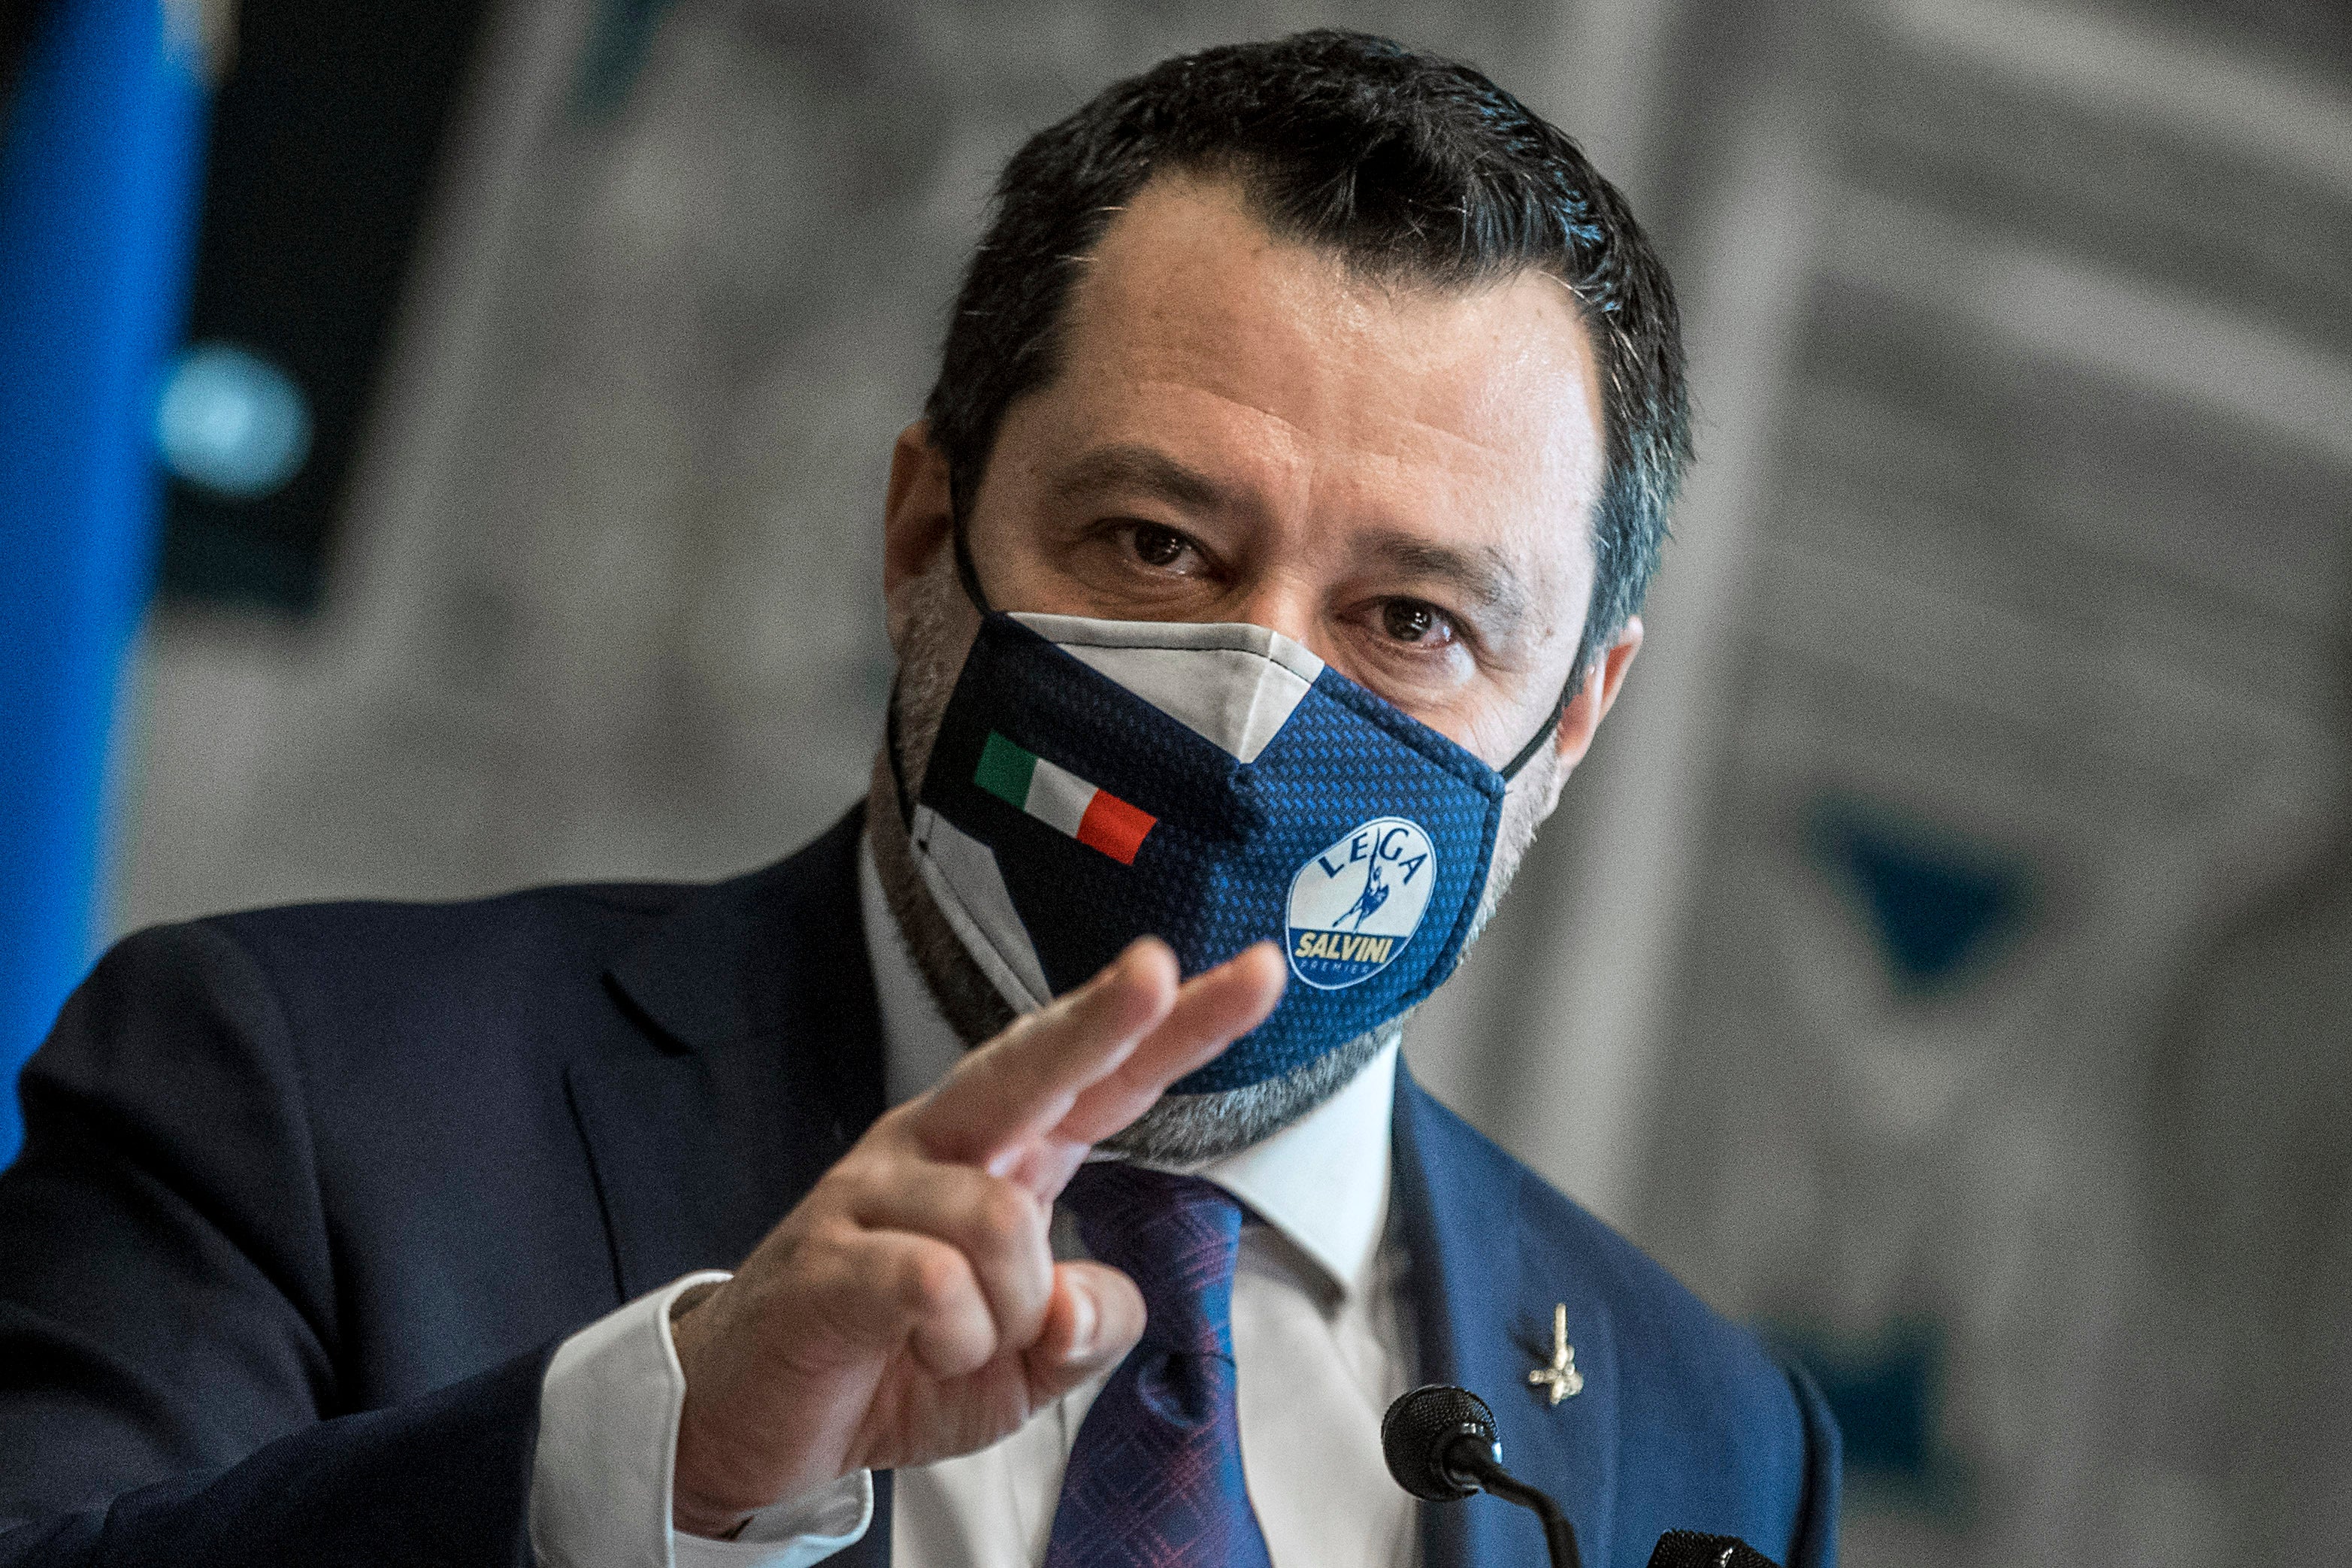 The League's Matteo Salvini addresses the media after meeting with Mario Draghi at the Chamber of Deputies in Rome on Saturday